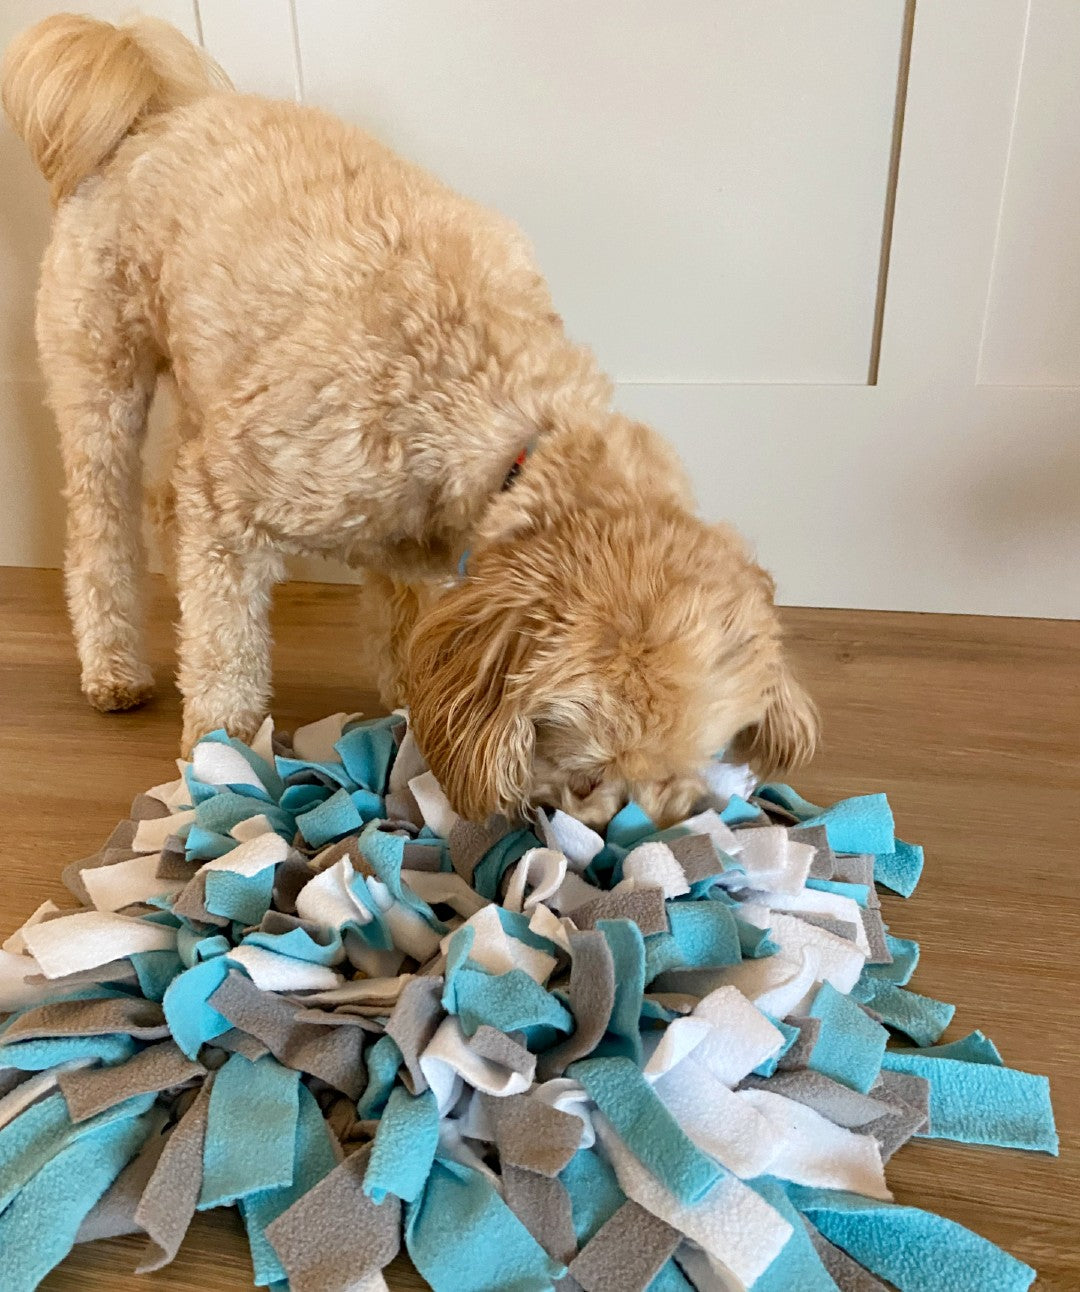 The Best Snuffle Mat For Dogs - Dog Treat Hiding Mat